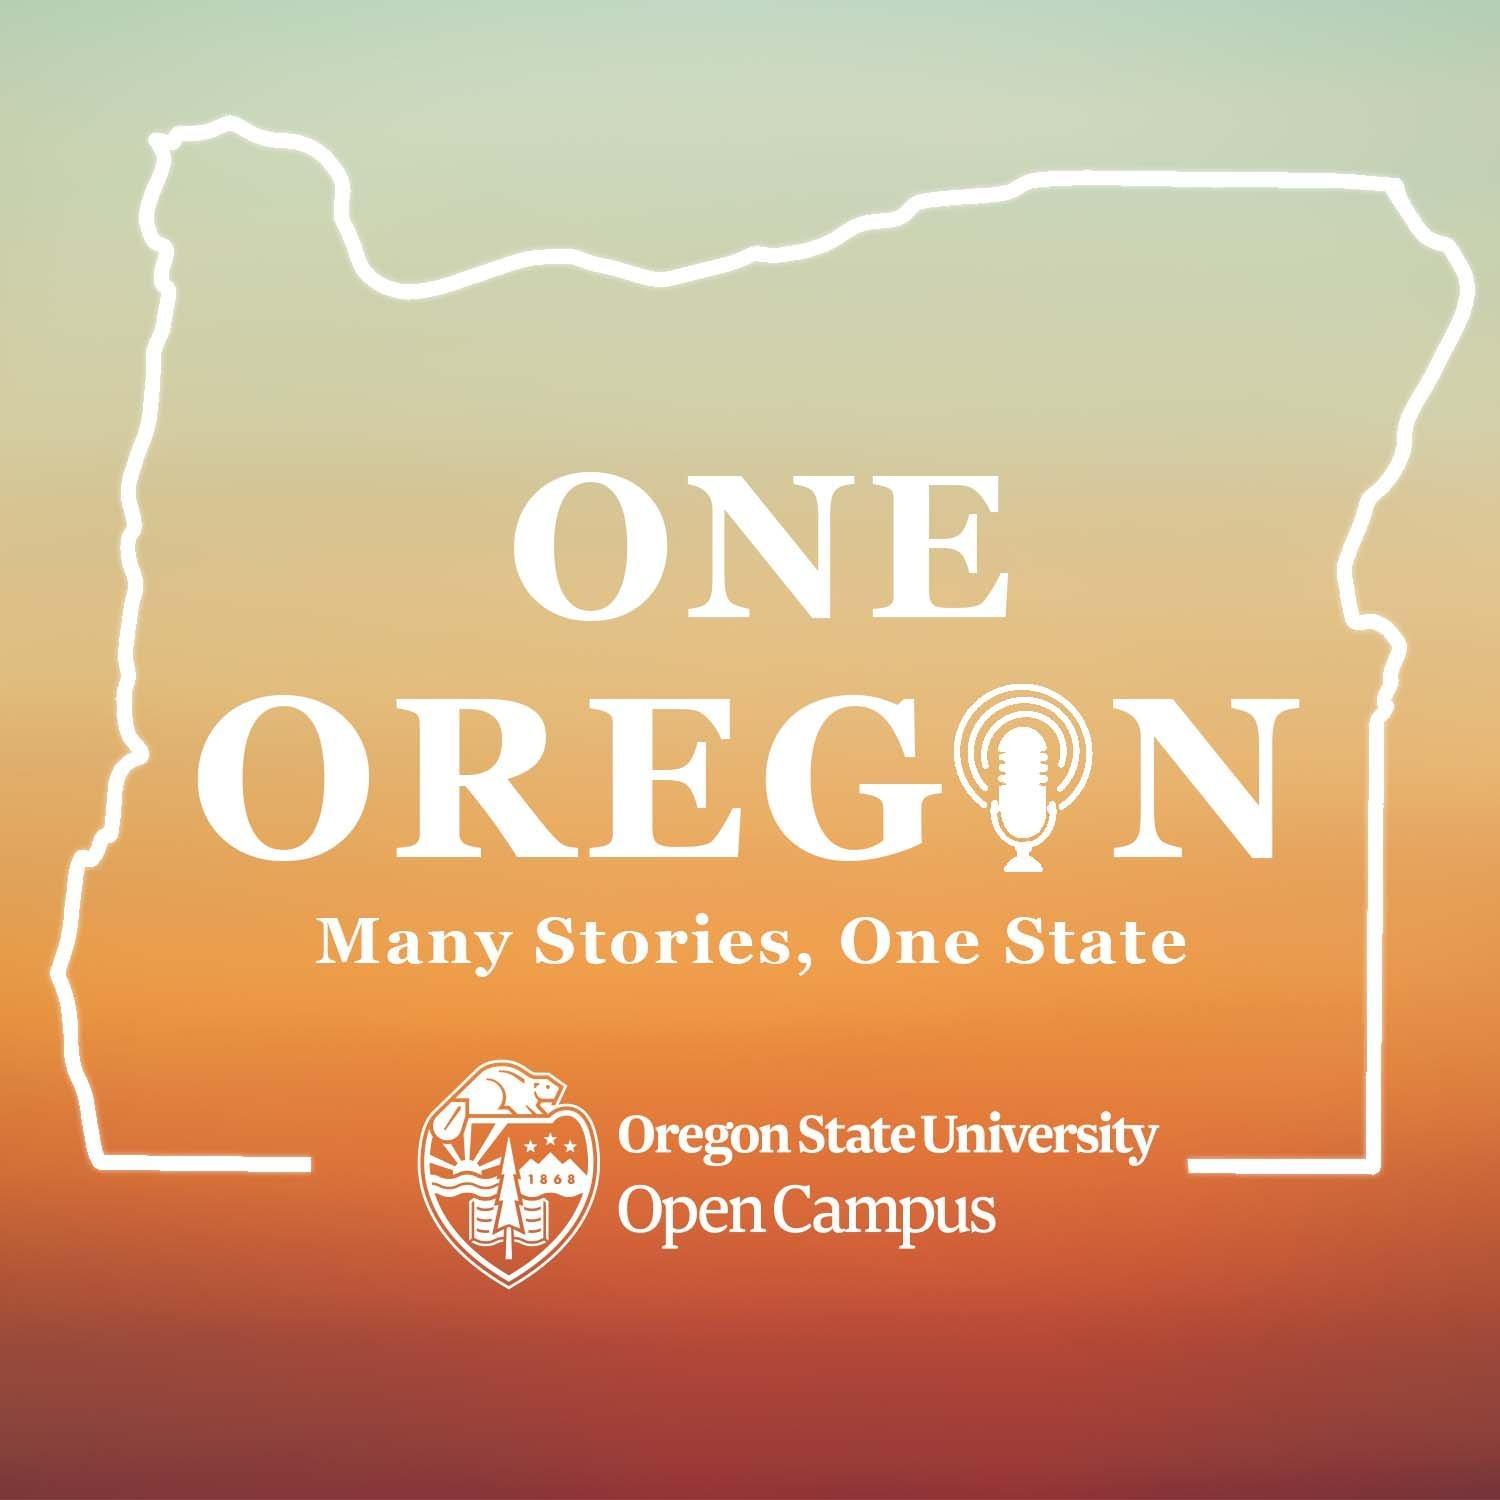 The logo for the One Oregon Podcast. It's an outline of the state of Oregon with text: One Oregon, Many Stories, One State.